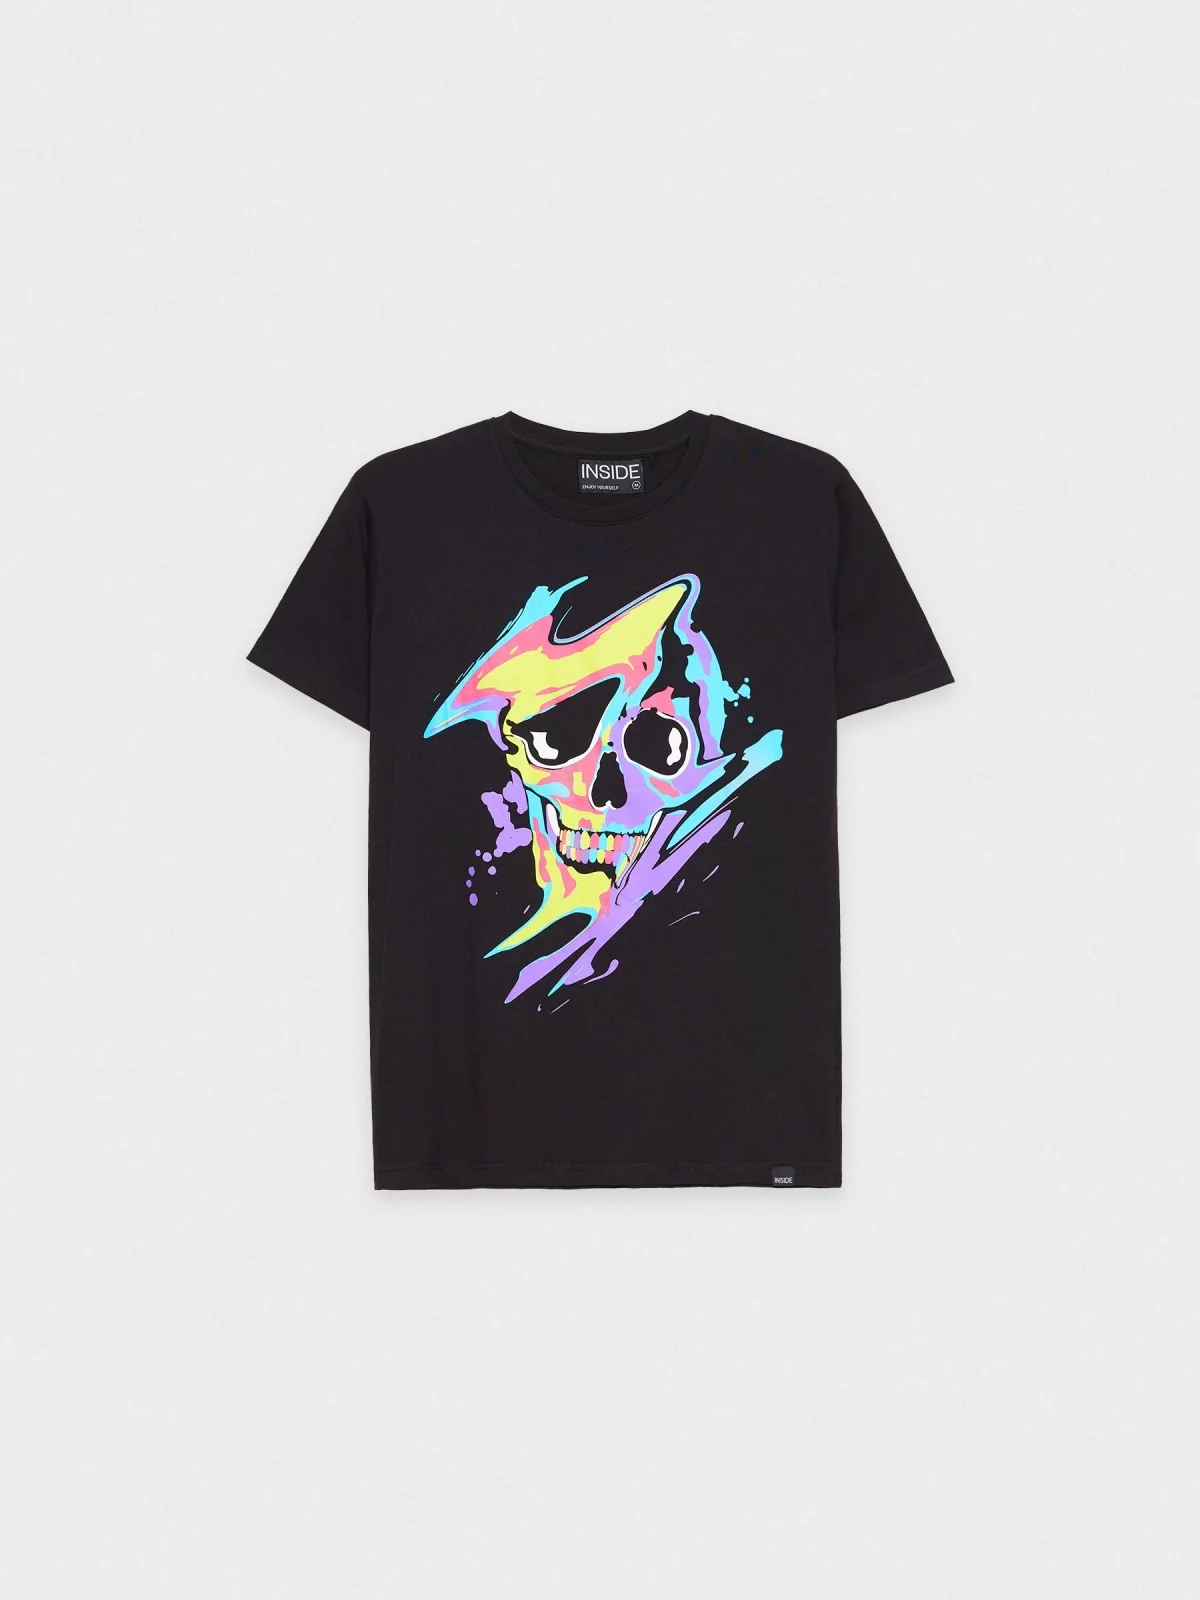  T-shirt "Diluted skull" preto